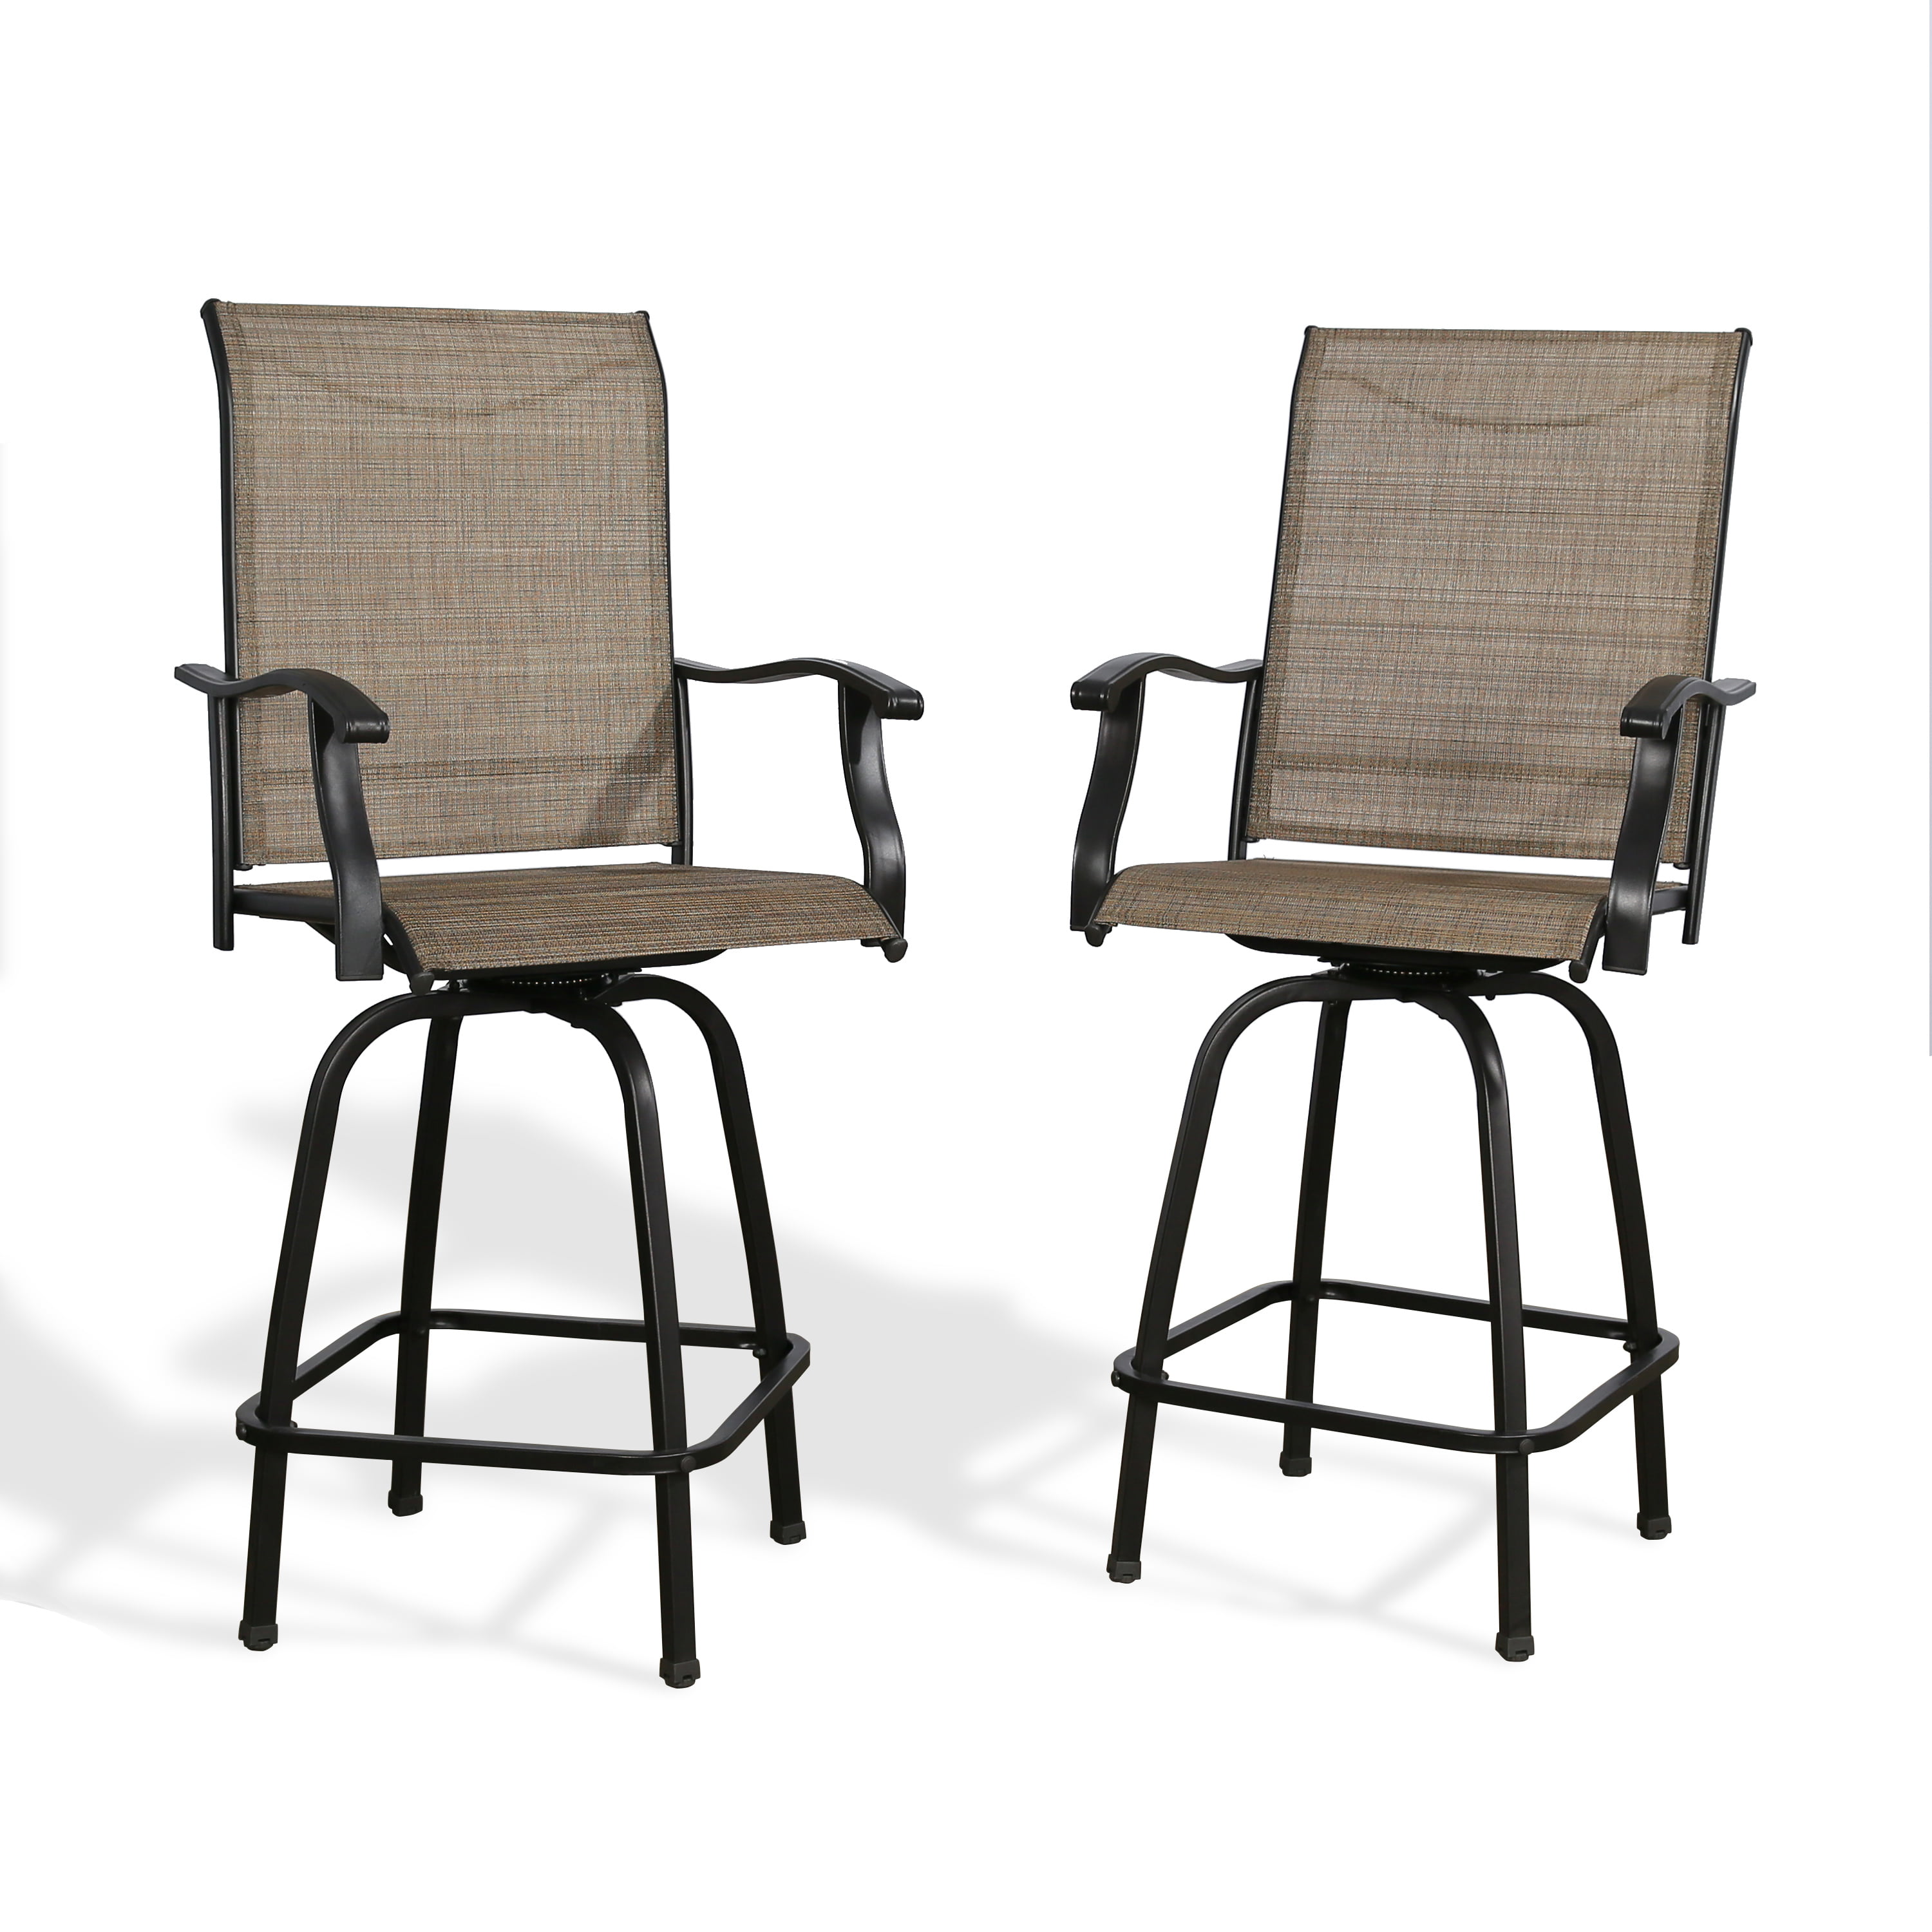 Ulax furniture Outdoor 2-Piece Swivel Bar Stools High Patio Chairs with Sling Seat